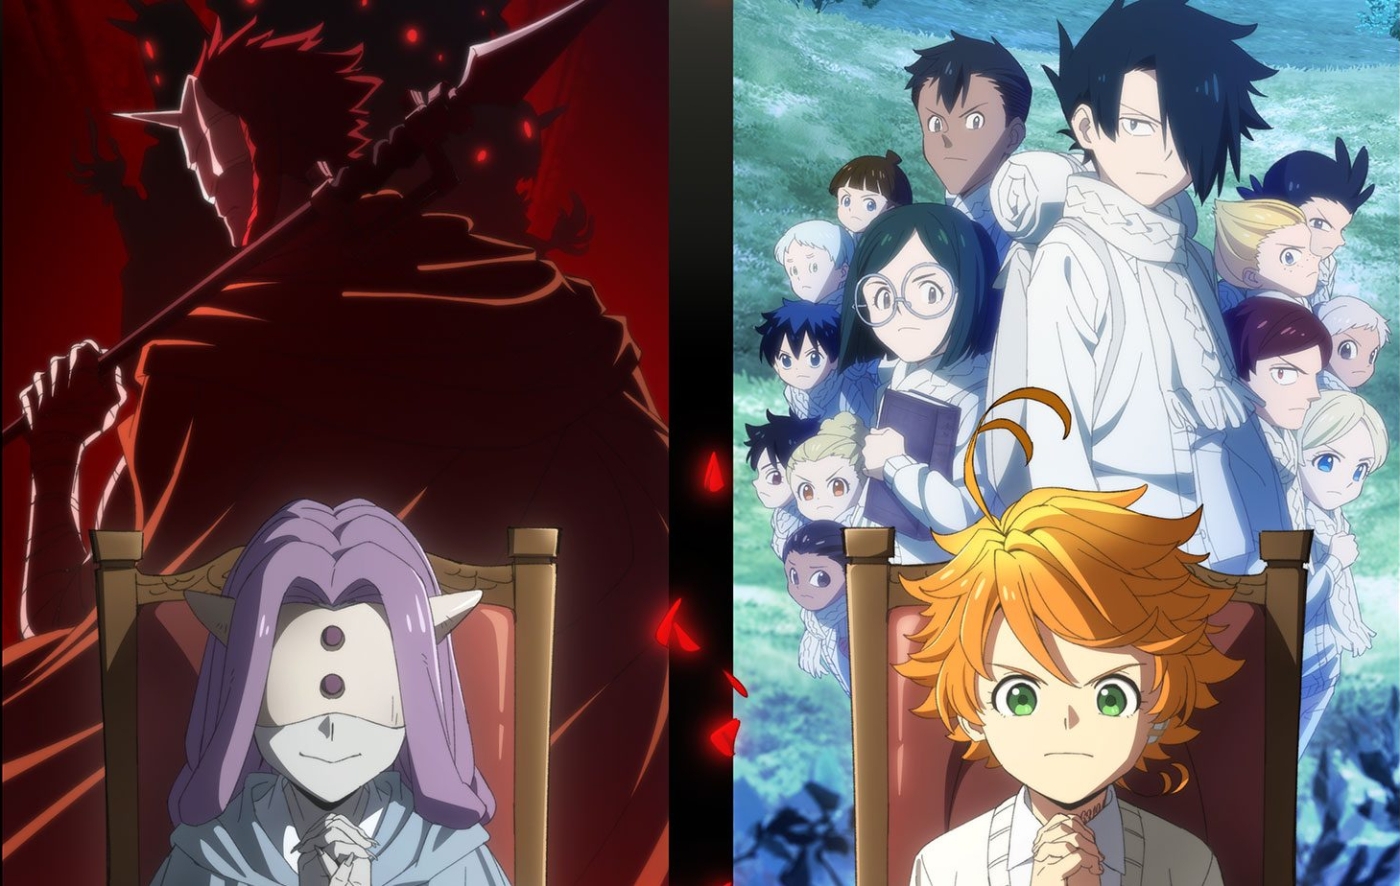 Promised Neverland: 6 Things Only Manga Readers Will Understand